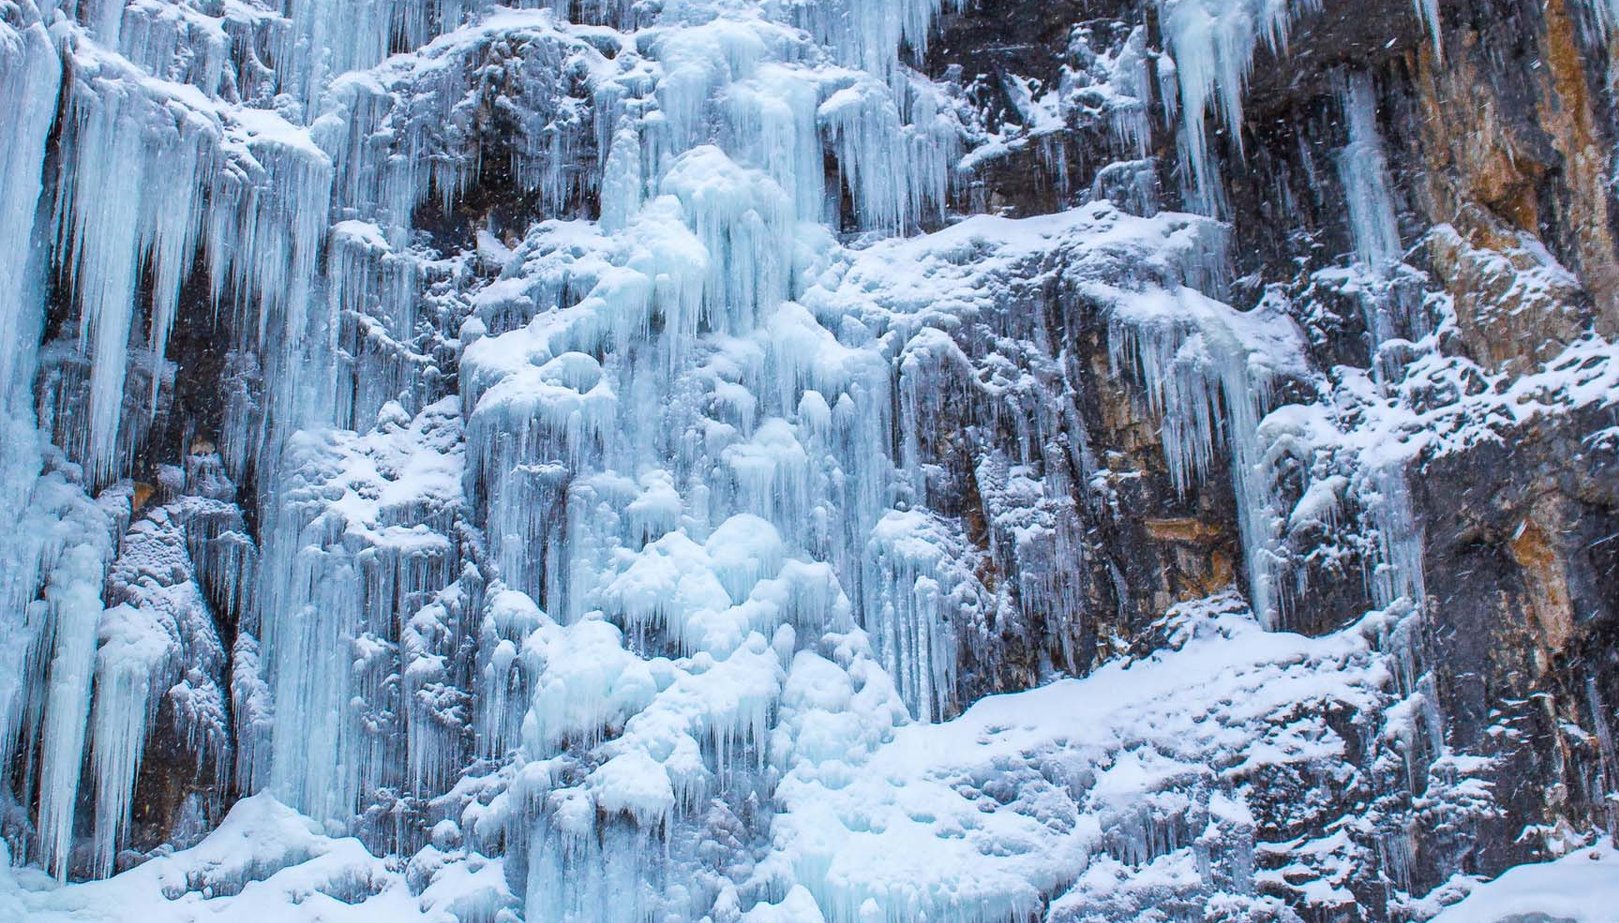 Two hikers looking up a frozen waterfall in Waterton National Park.